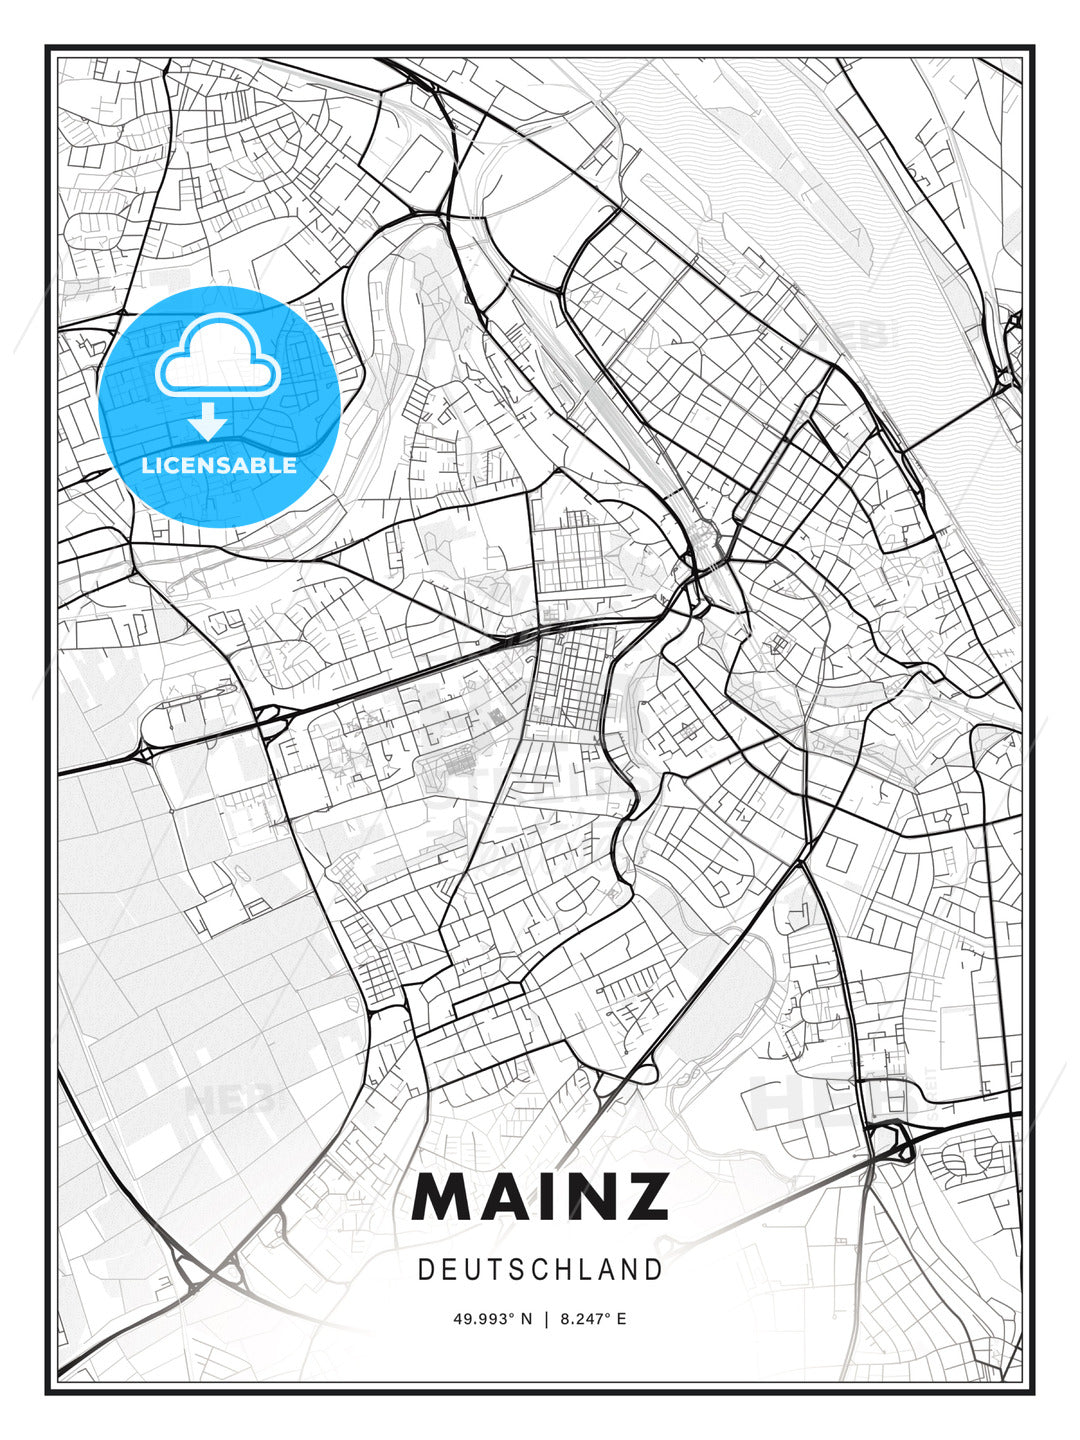 Mainz, Germany, Modern Print Template in Various Formats - HEBSTREITS Sketches